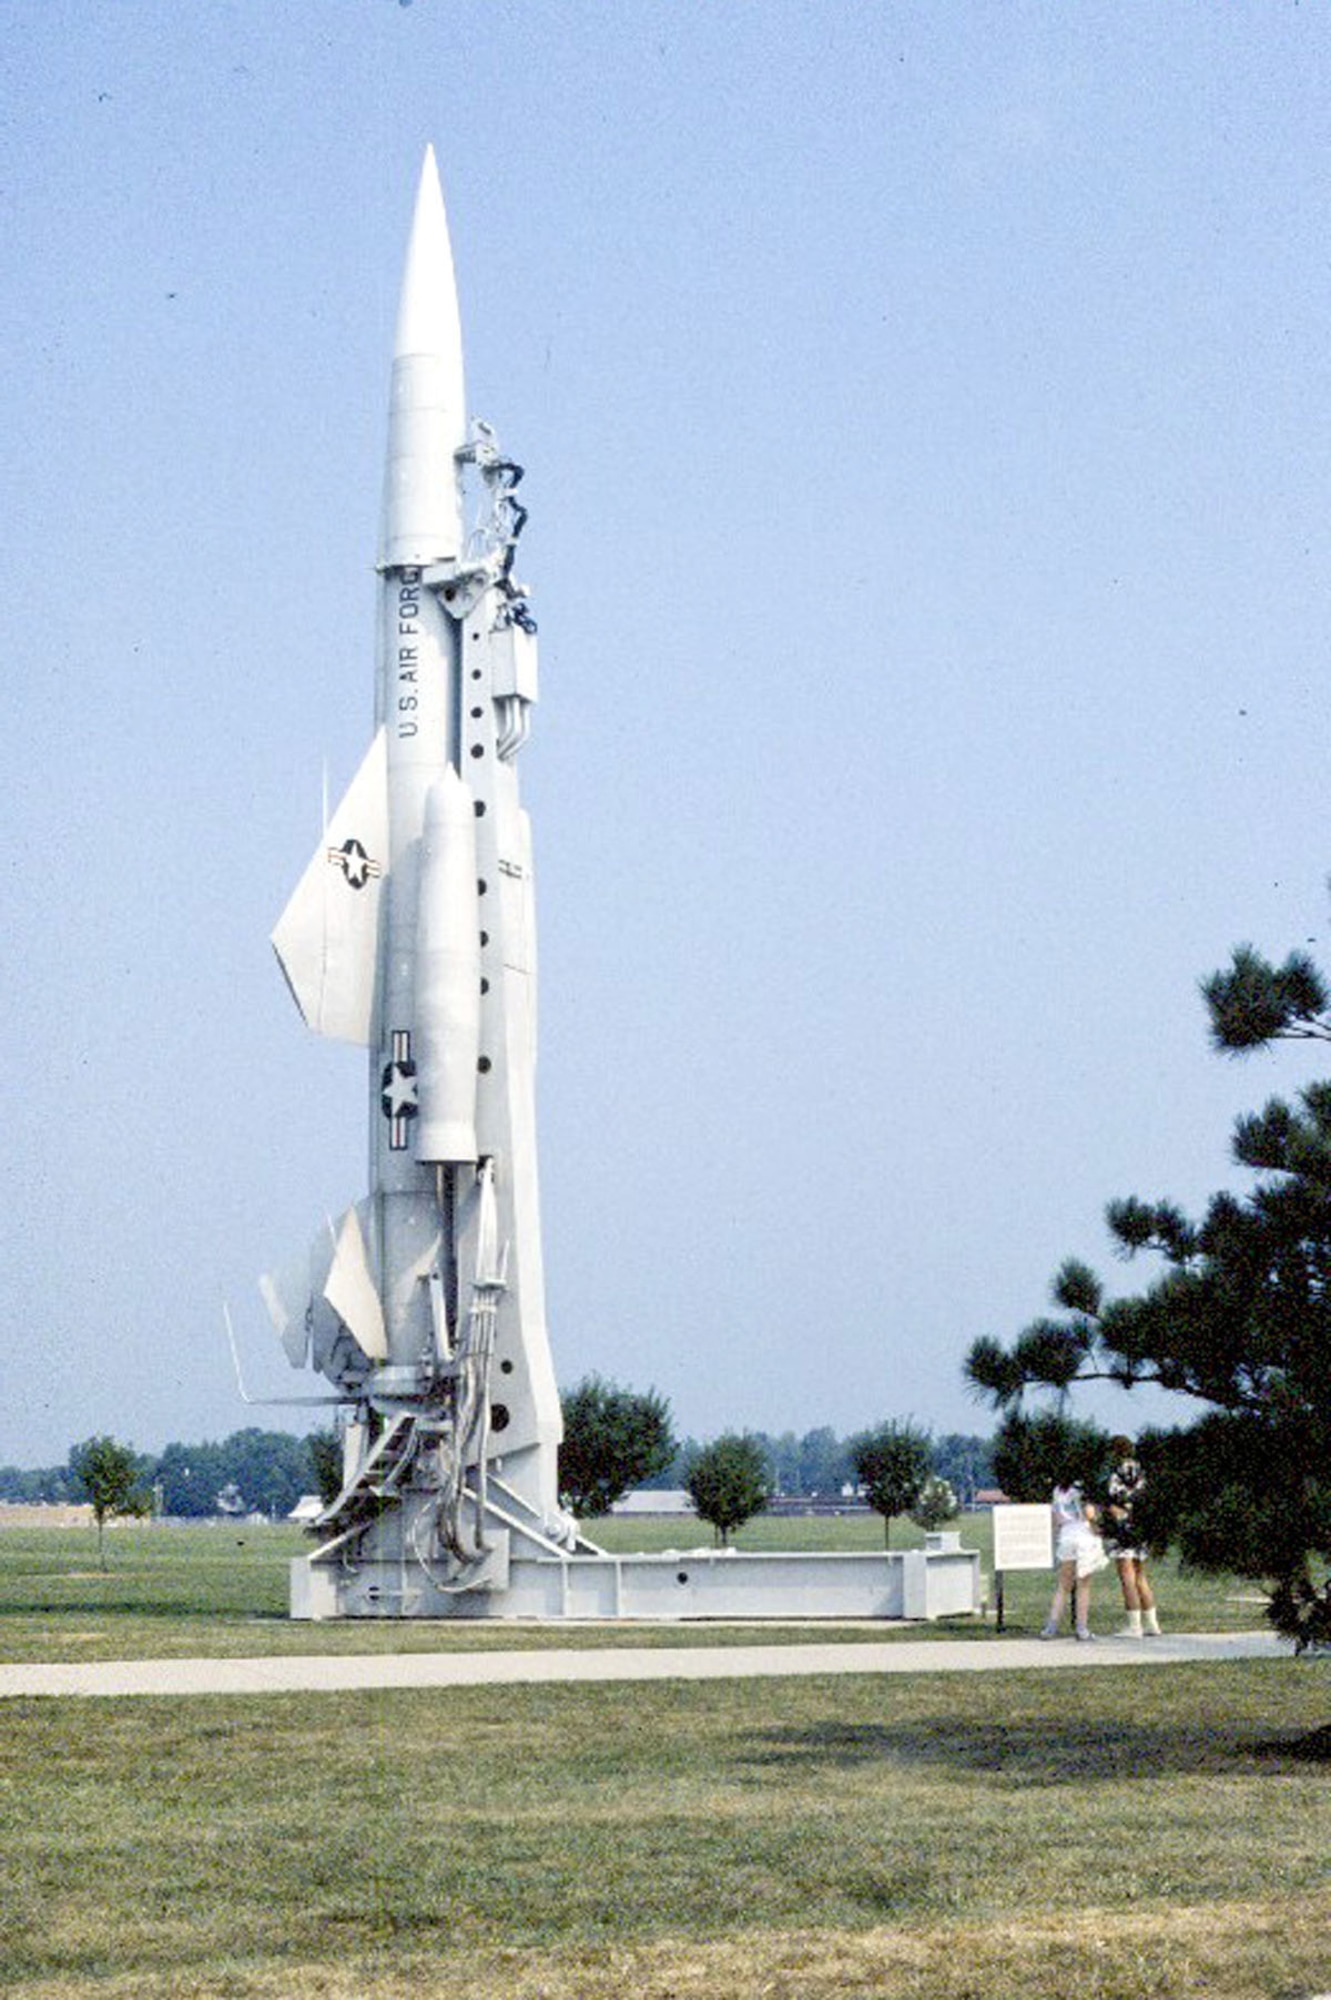 The Bomarc was a surface-launched, pilotless interceptor missile designed to destroy enemy aircraft. (U.S. Air Force photo)